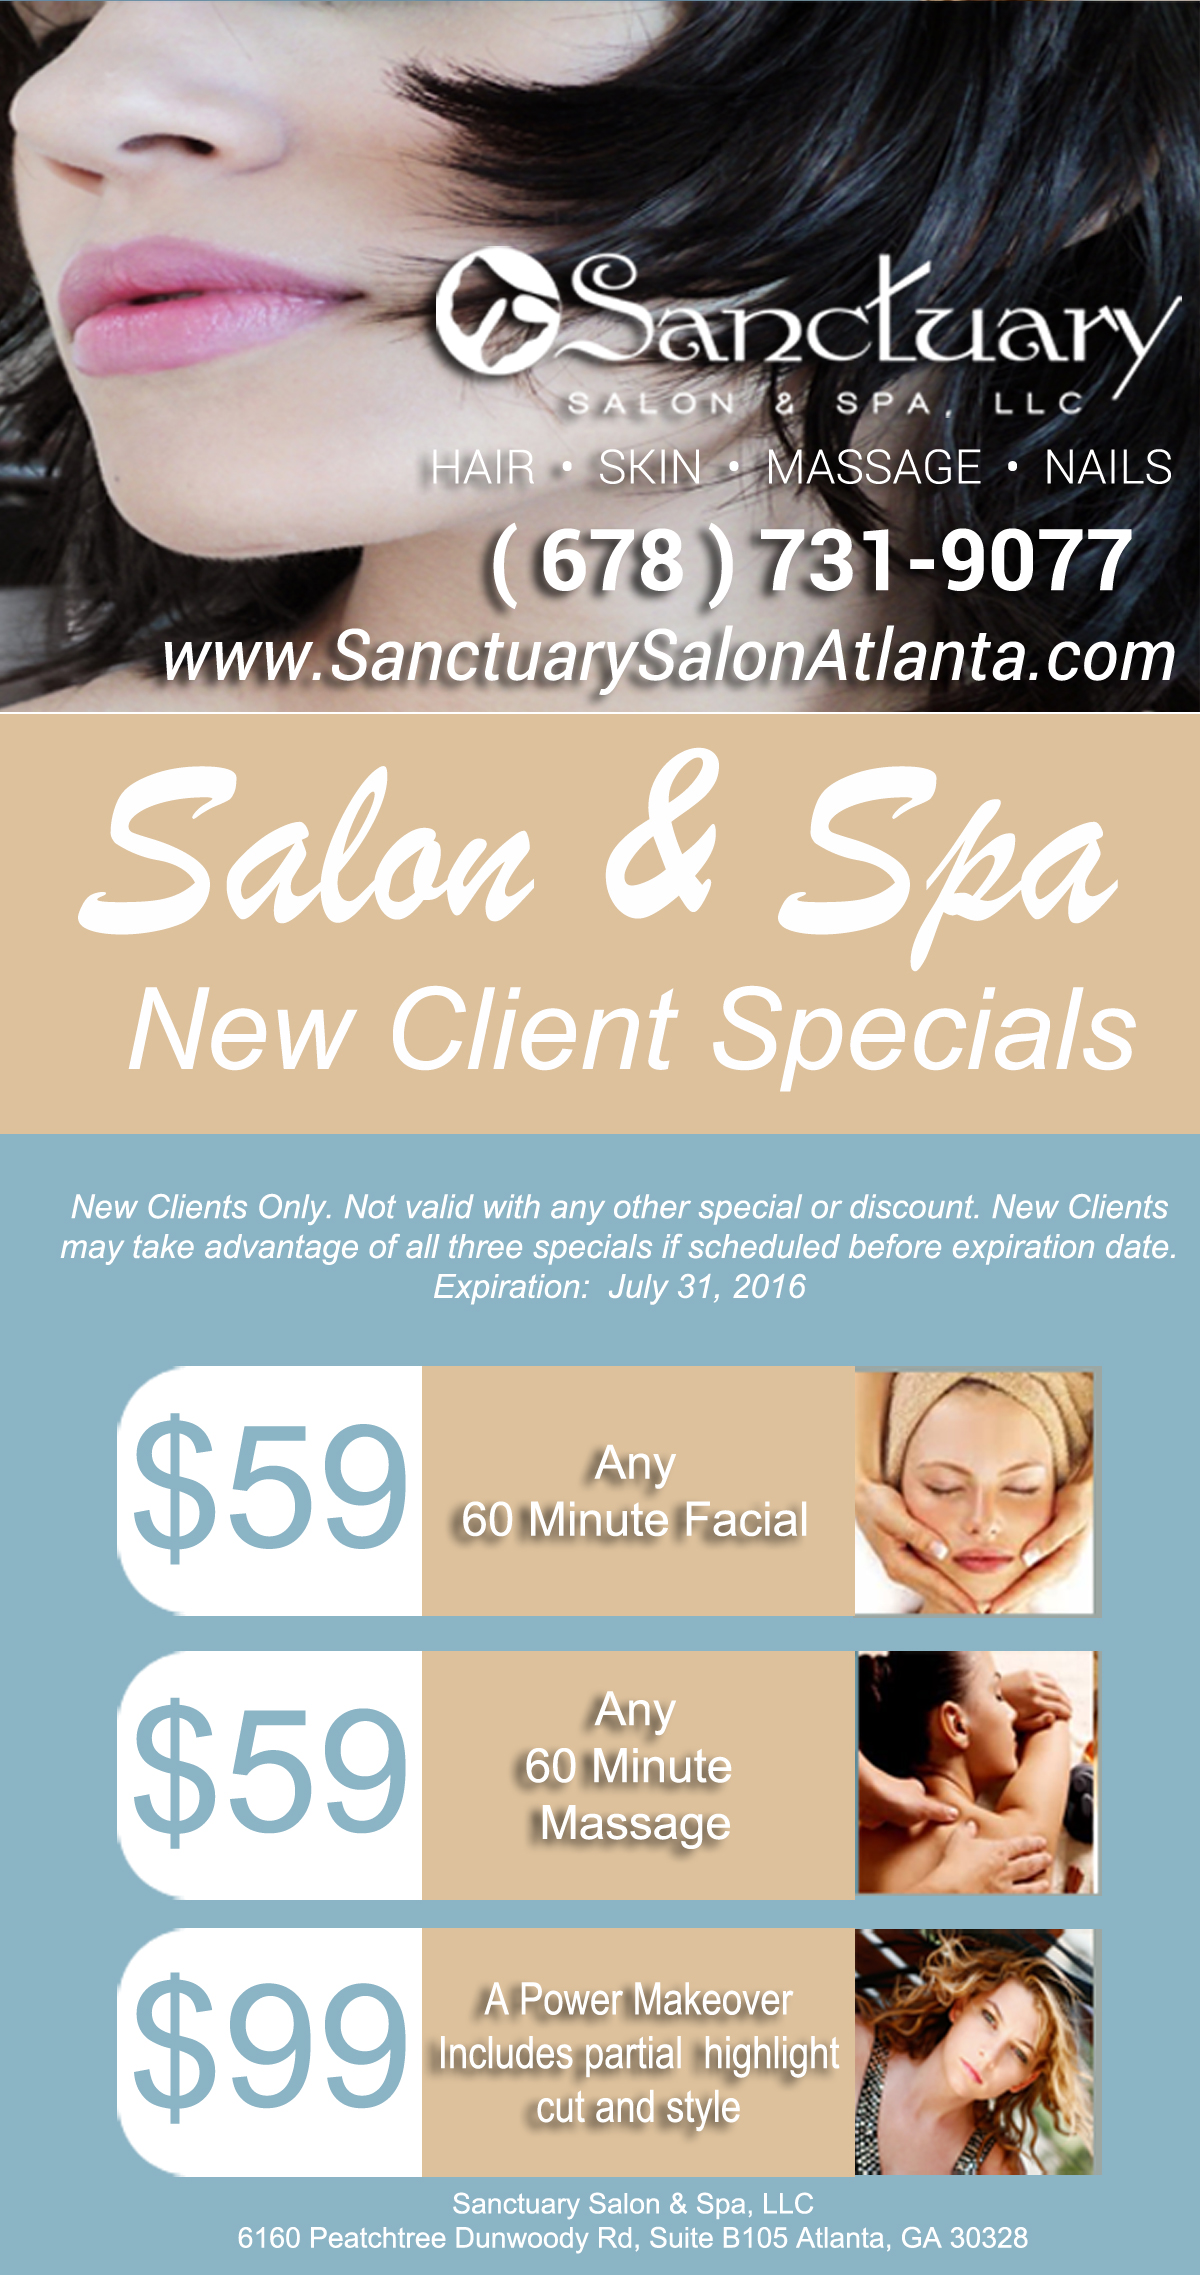  Hair  Salon  Day Spa  New Client Specials  July 2019 